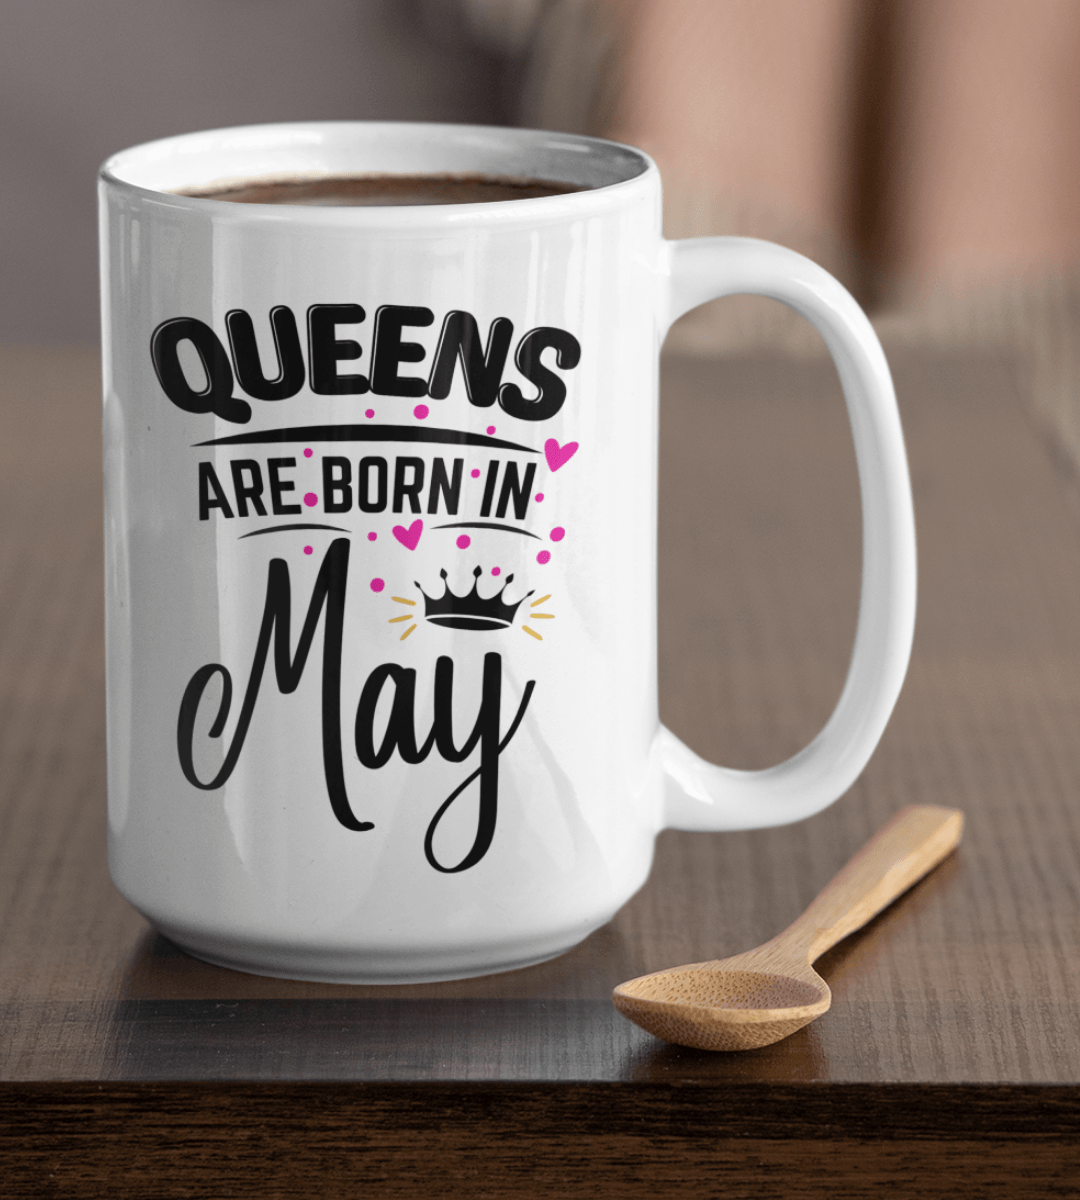 Queens Are Born In May Heart White Mug - TheGivenGet